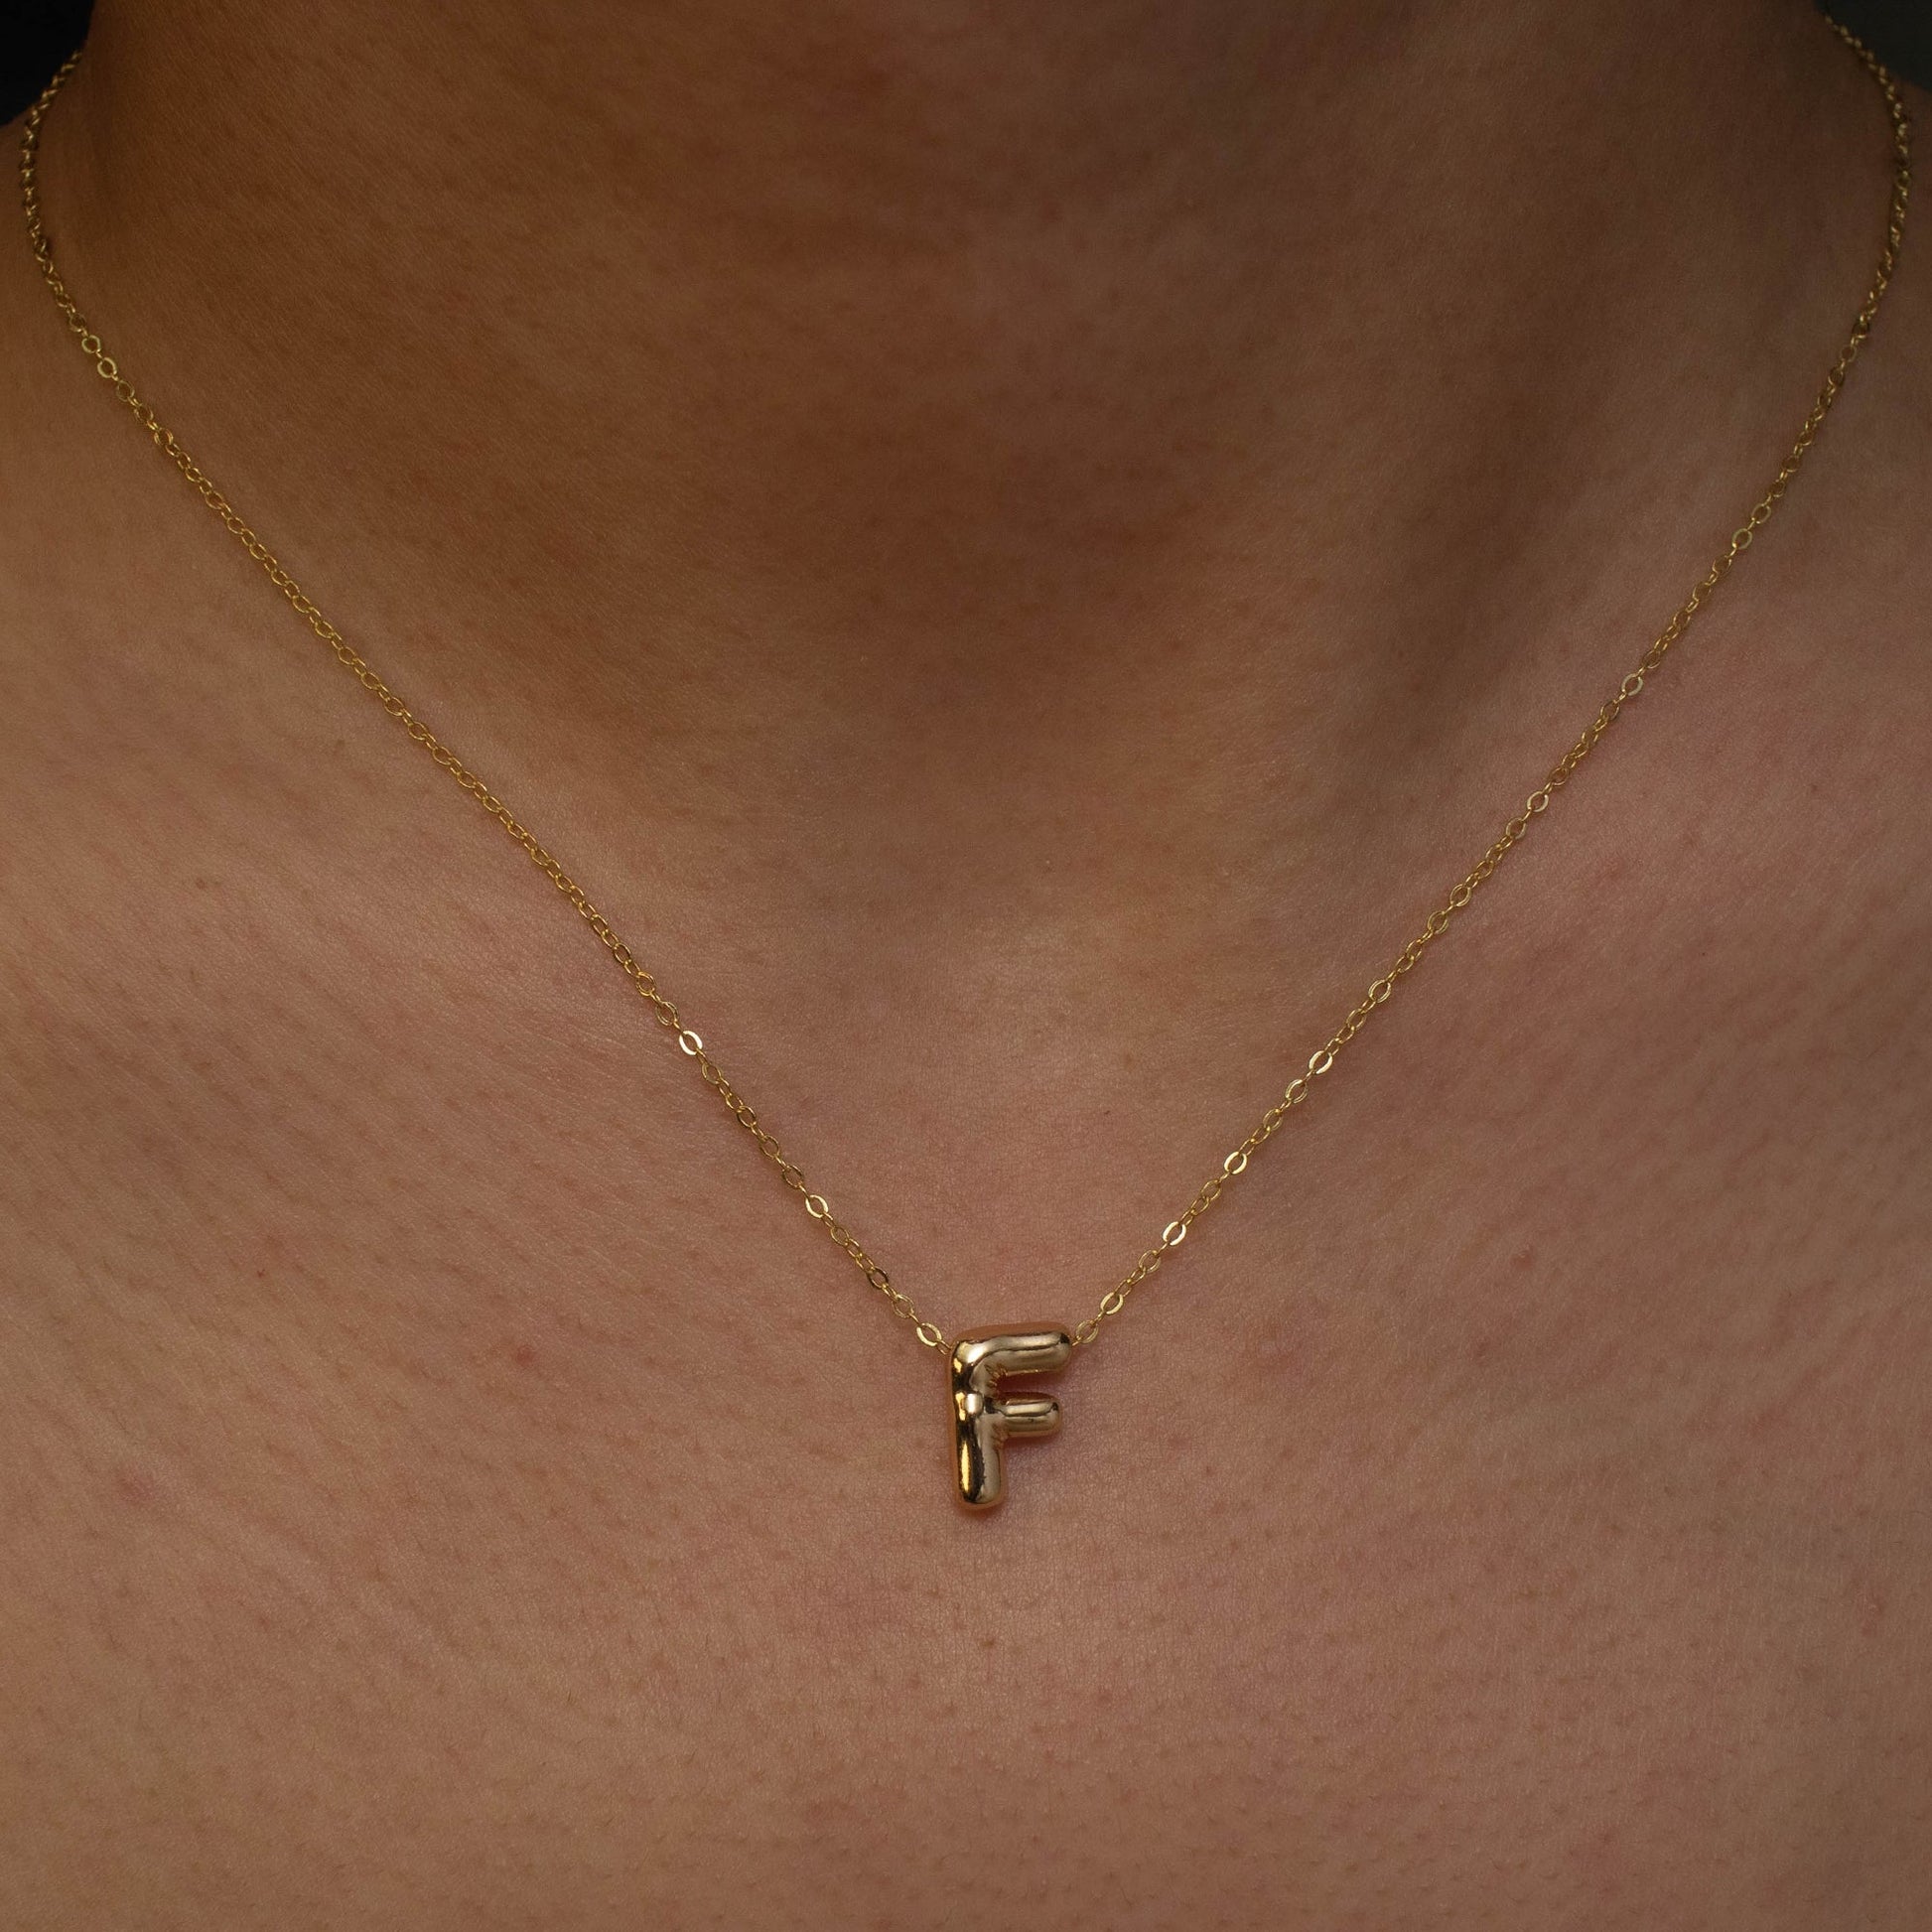 This photo features a thin chain necklace made of 14K gold-plated sterling silver, paired with a golden Bubble Letter pendant.